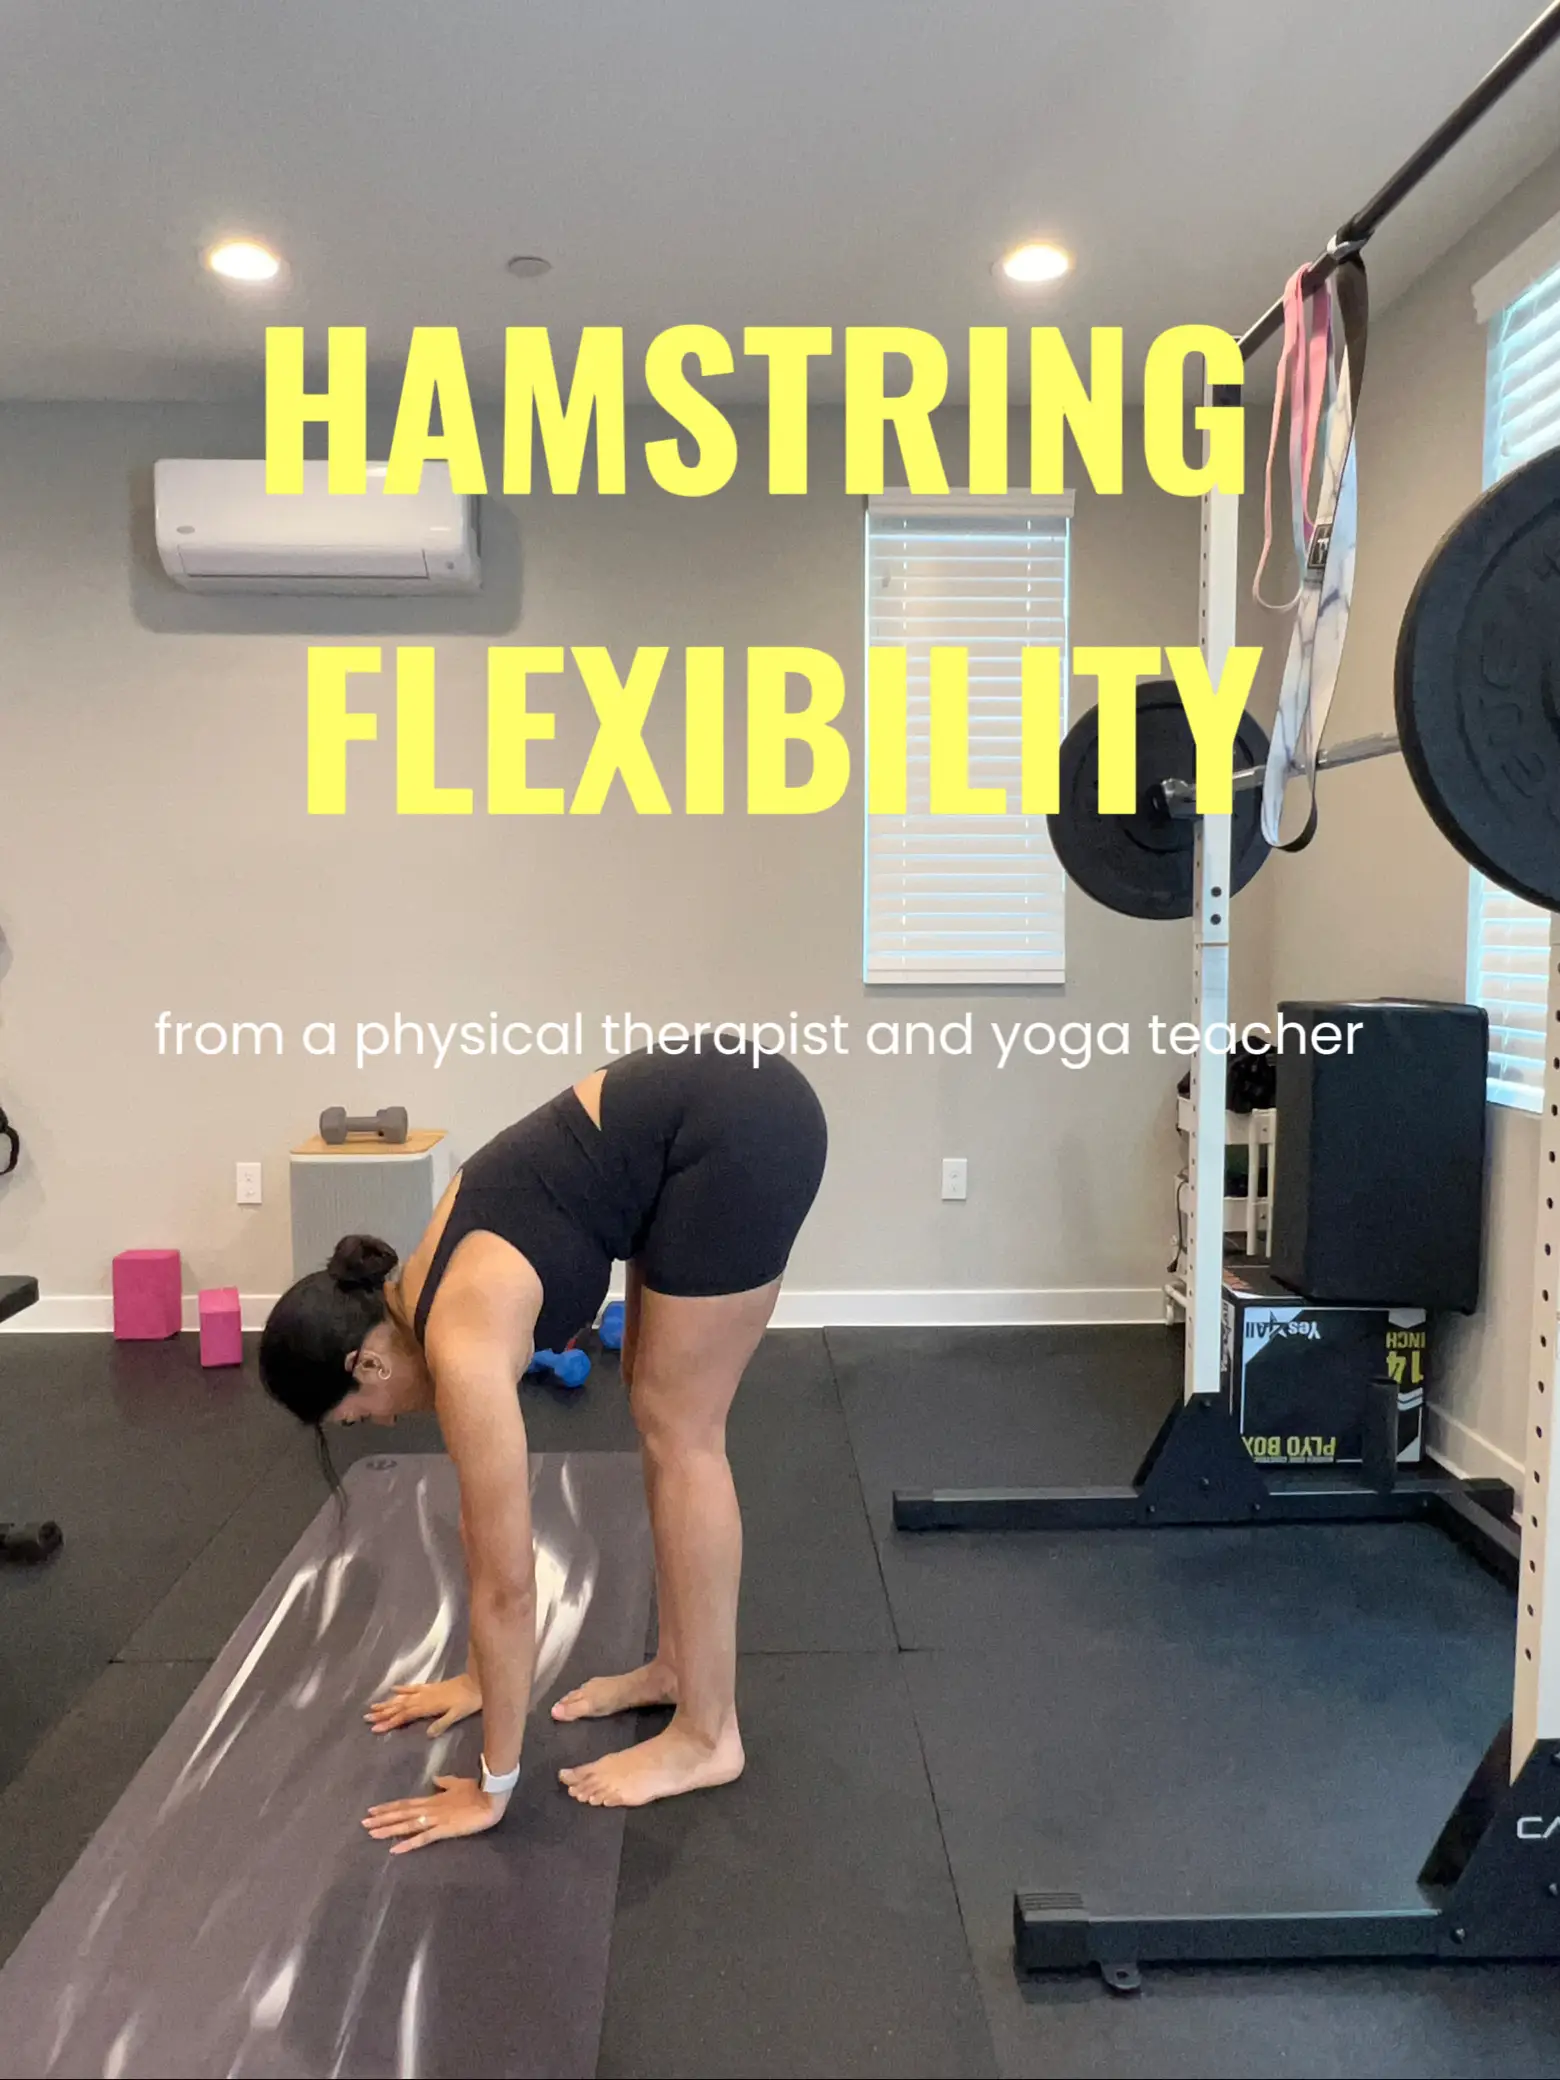 Would you like to try these 4 yoga poses for Neck Flexibility? ( Post #3 )  : r/flexibility